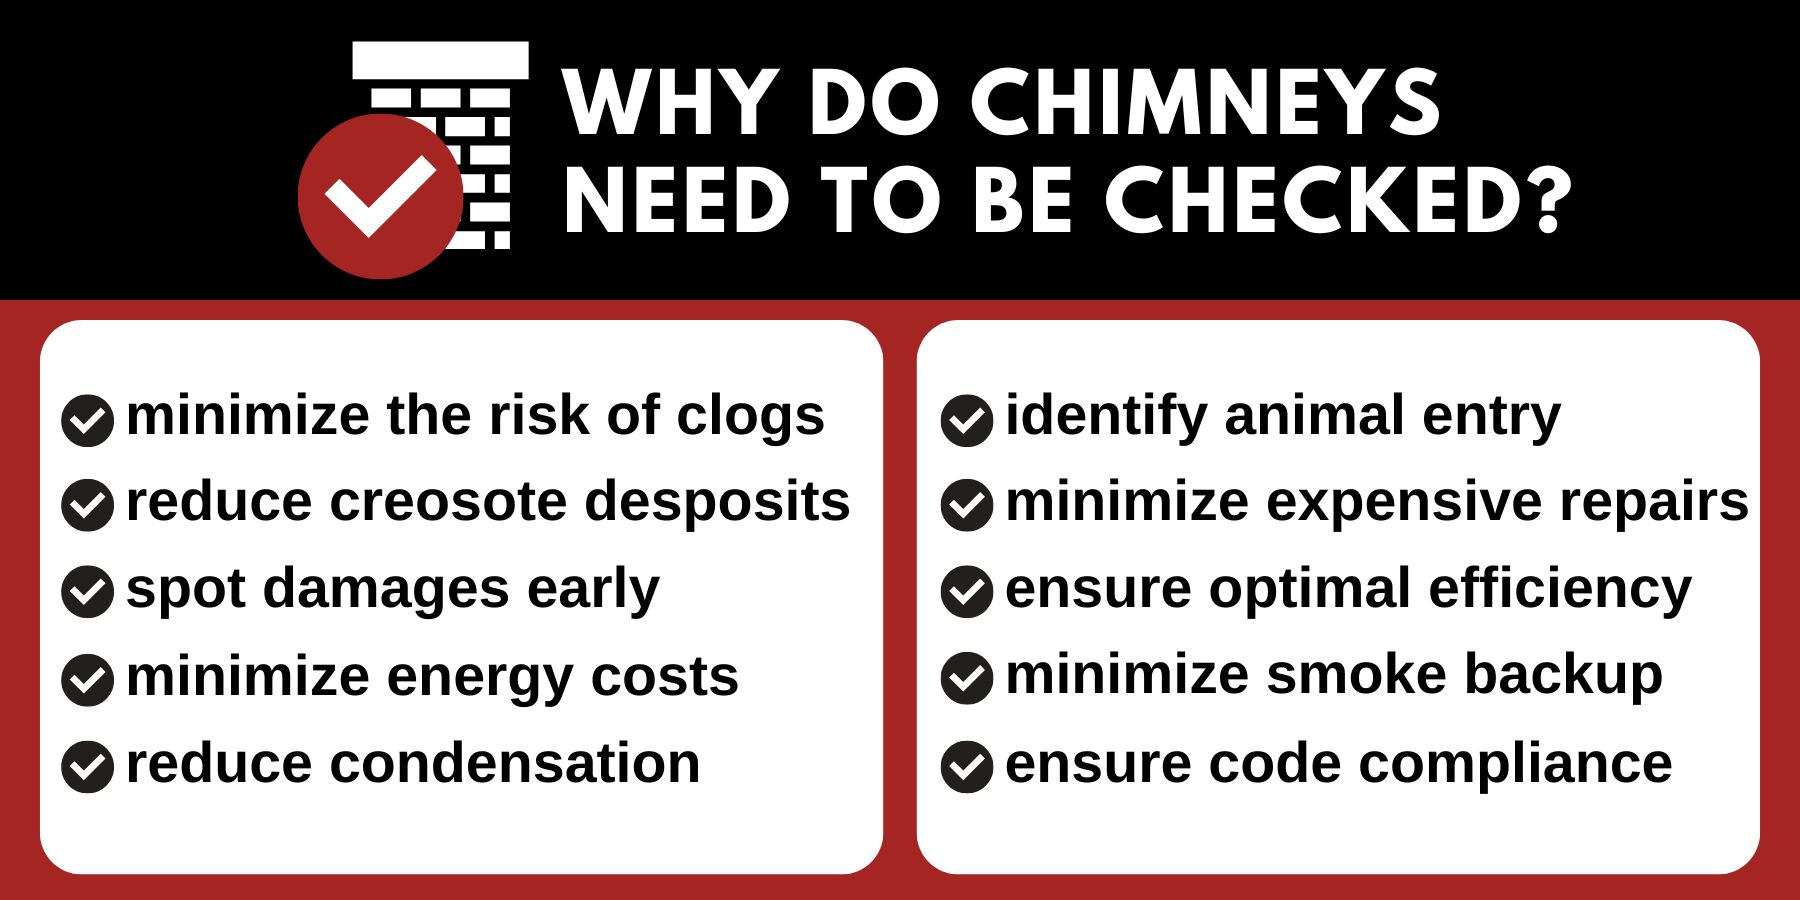 Original infographic asking "Why do chimneys need to be checked?"